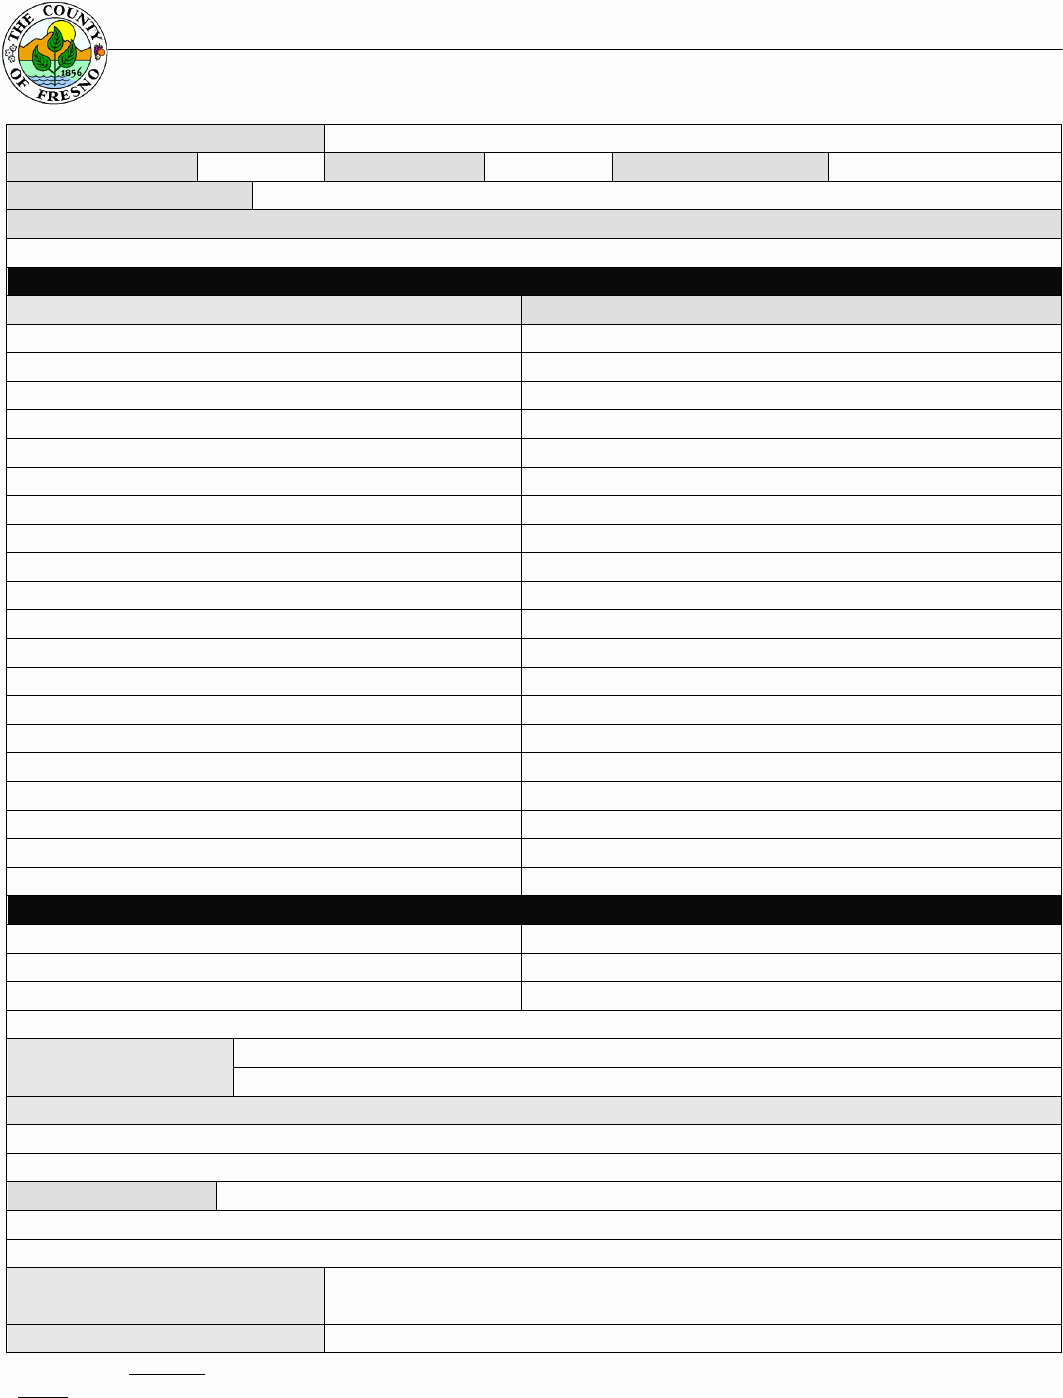 Safety Meeting Sign In Sheet Inspirational Download Safety Meeting Sign In Sheet for Free Tidytemplates